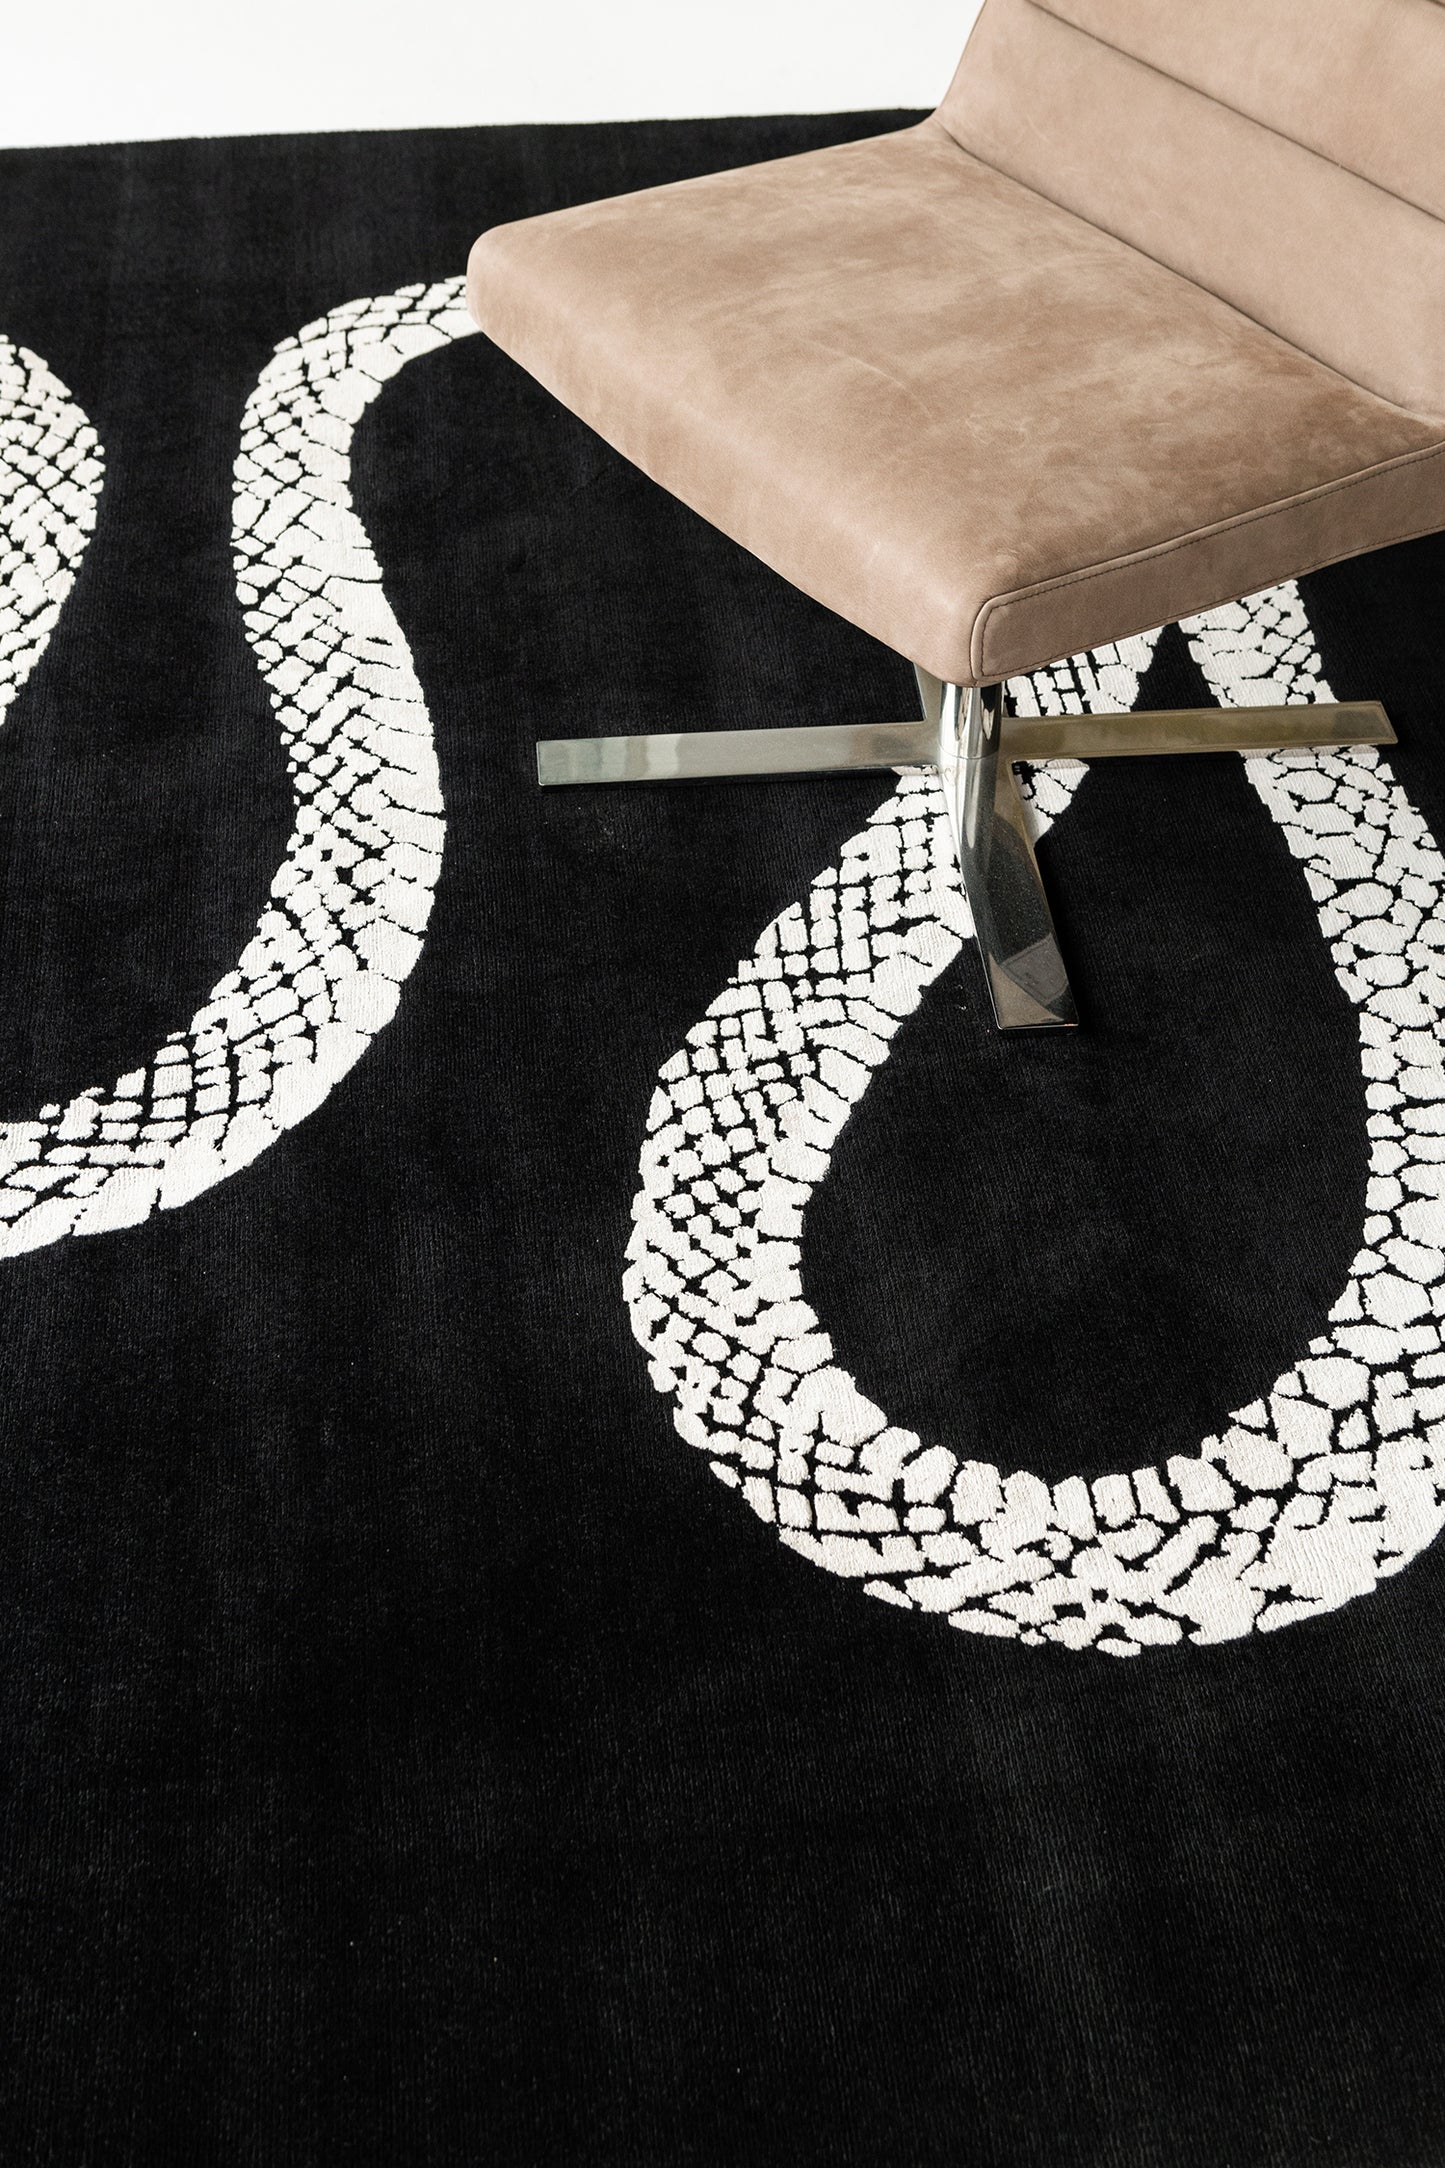 Modern Rug Image 14001 Year of the Snake by Liesel Plambeck